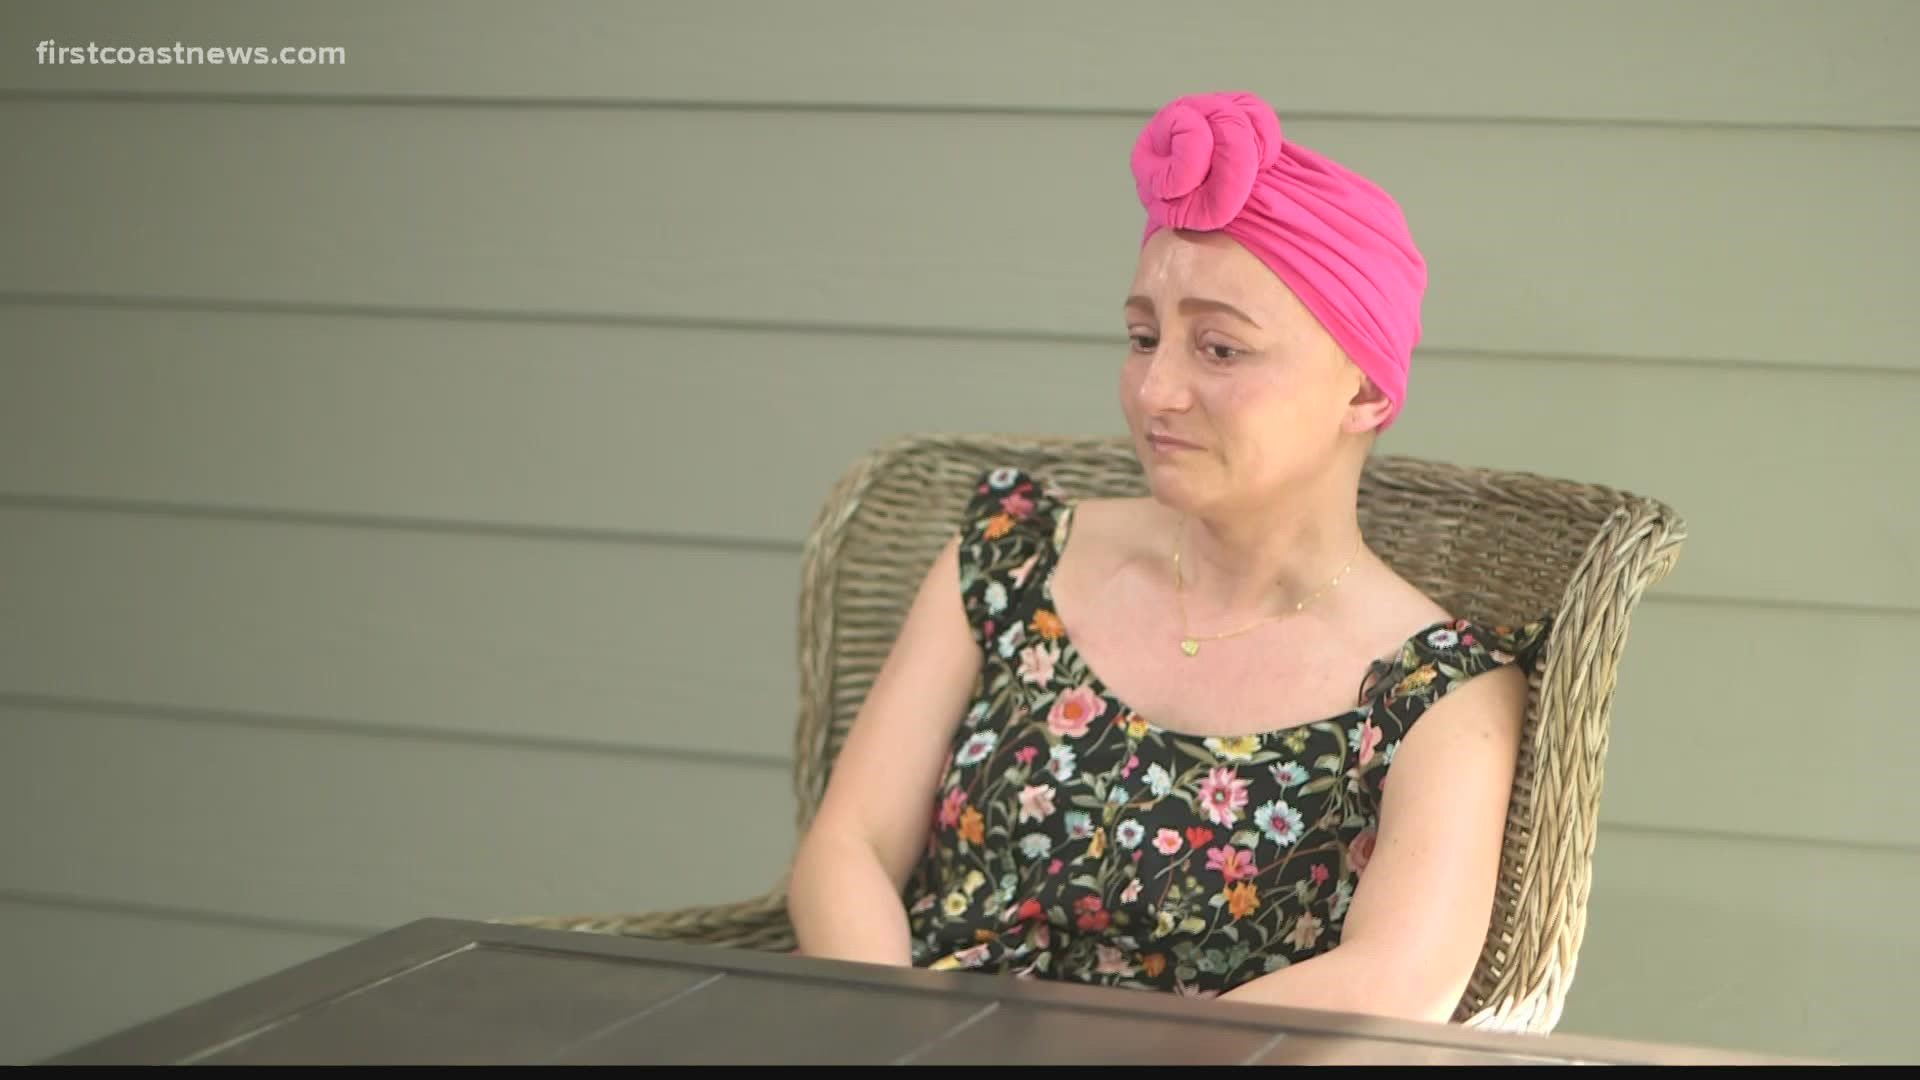 Shannah Montgomery was just 33 when she was diagnosed with Stage 3 breast cancer. She thought the lump she found was just a cyst.